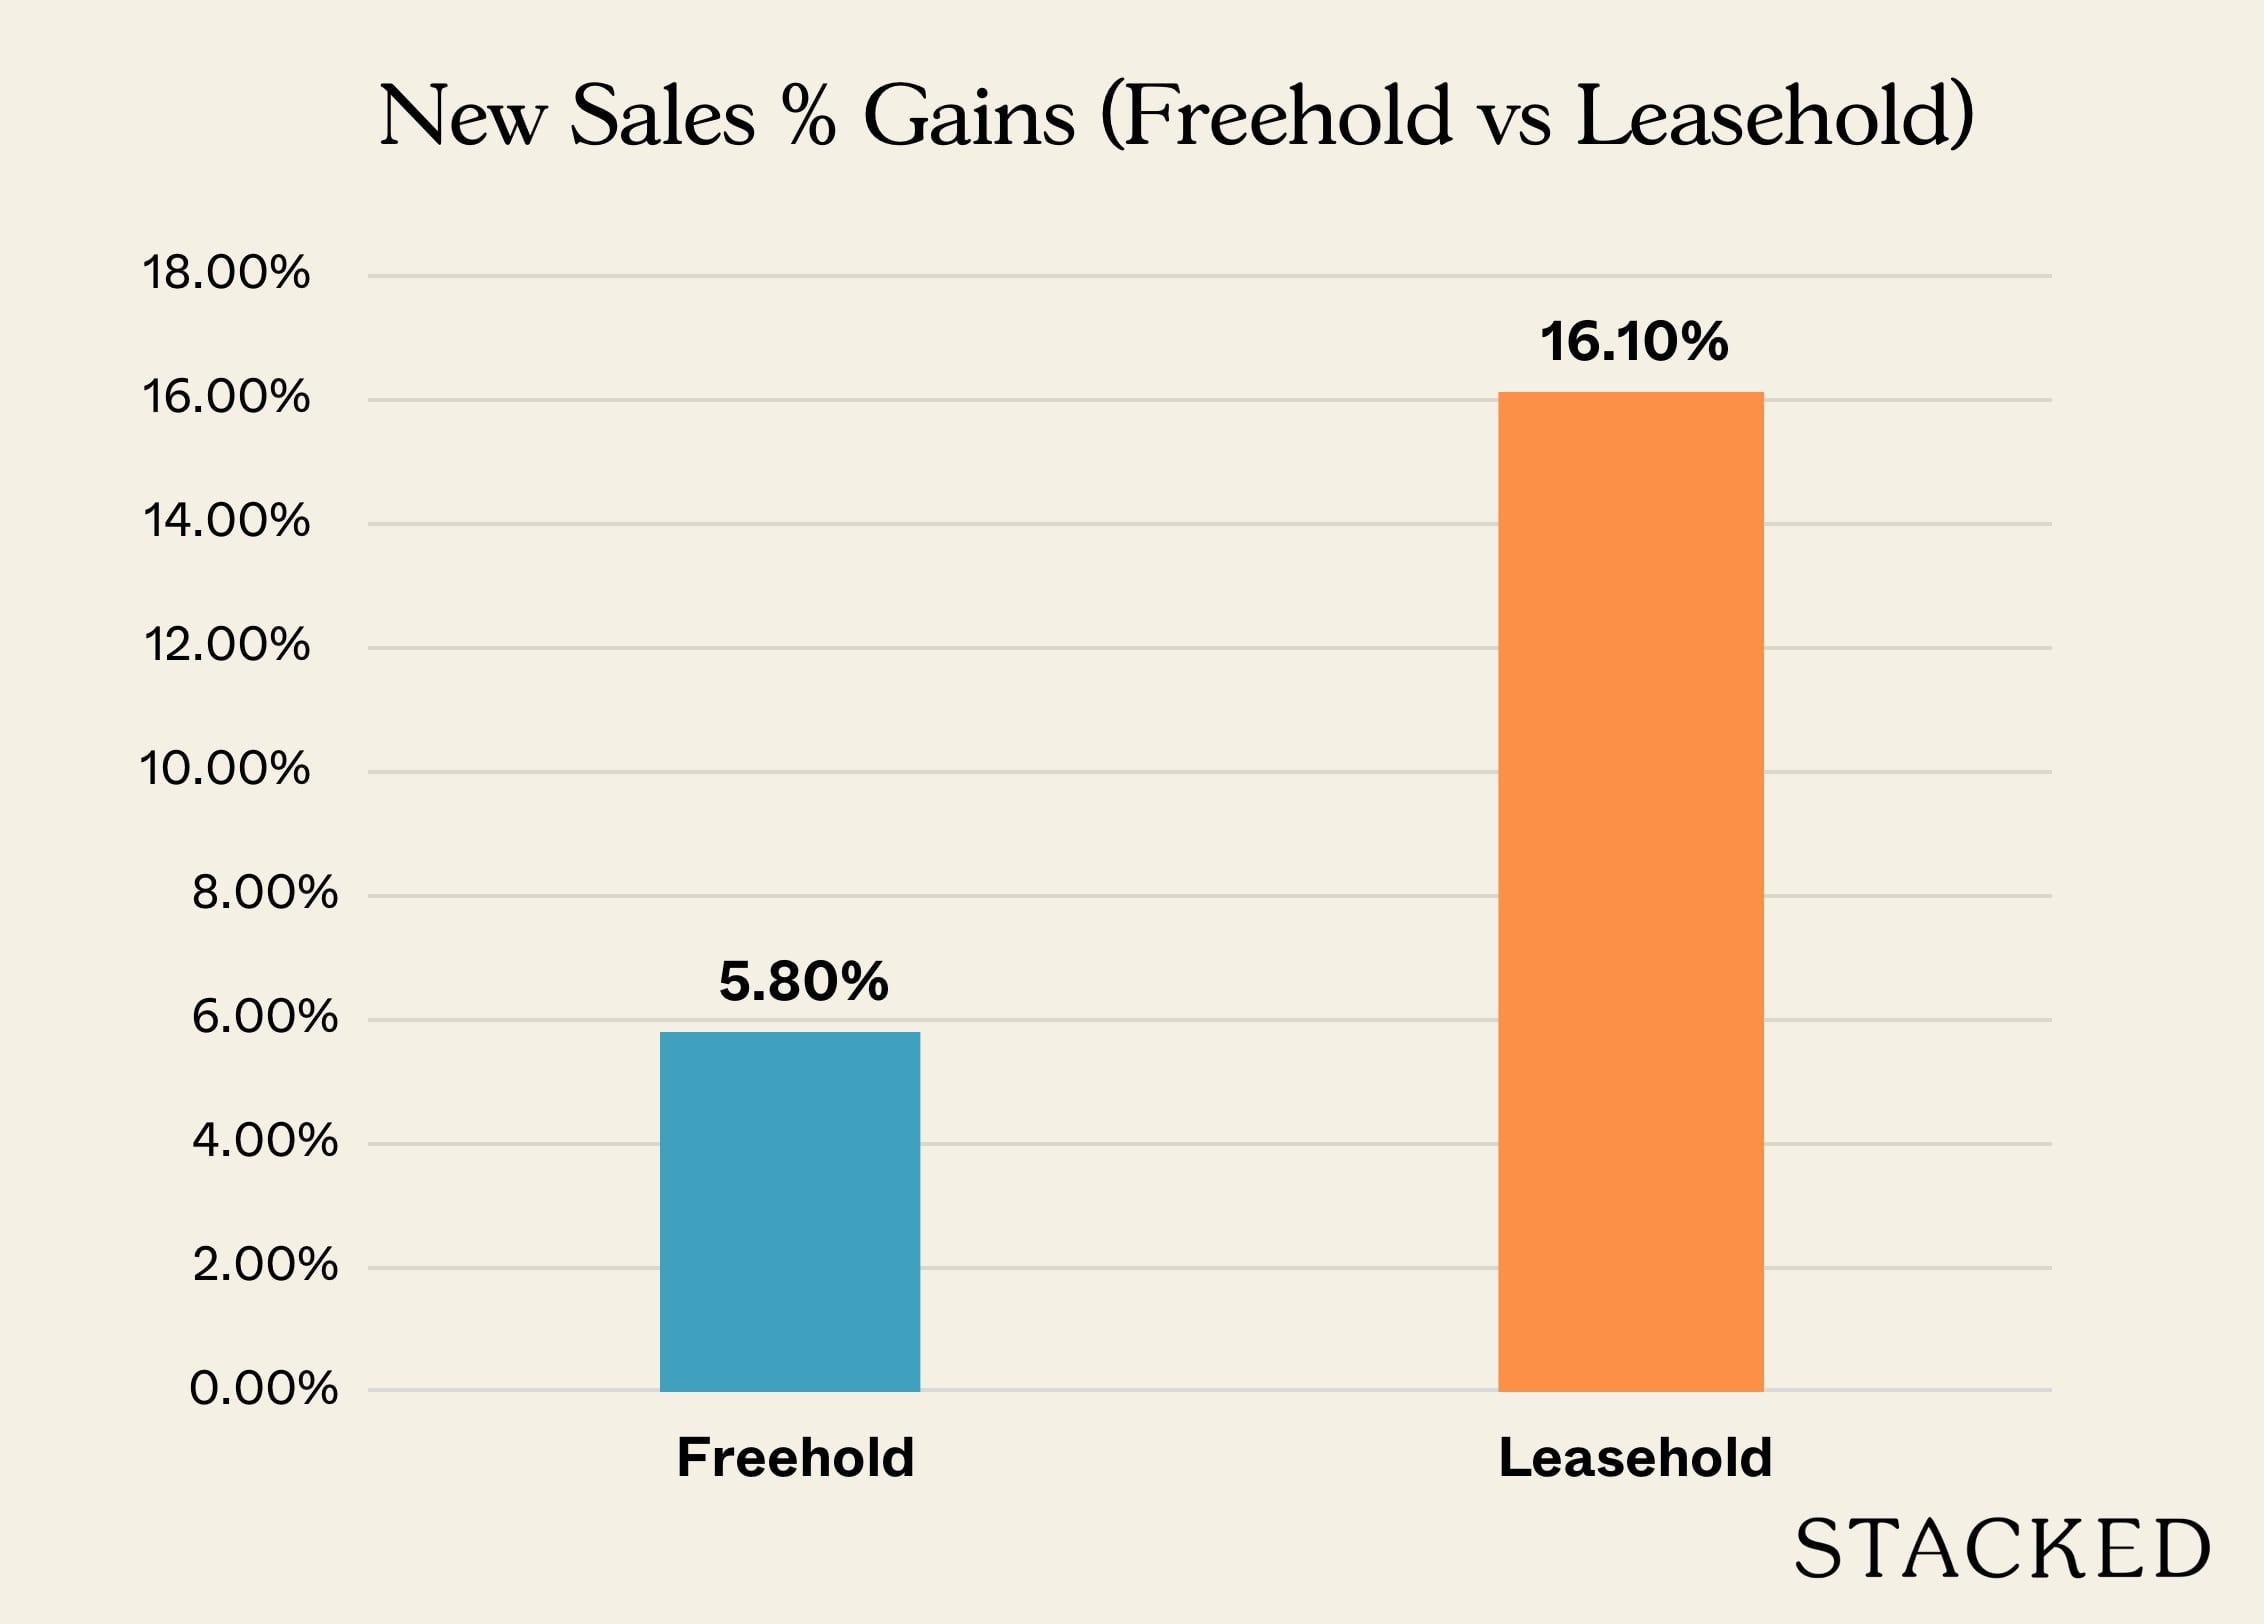 New Sales Gains Freehold vs Leasehold